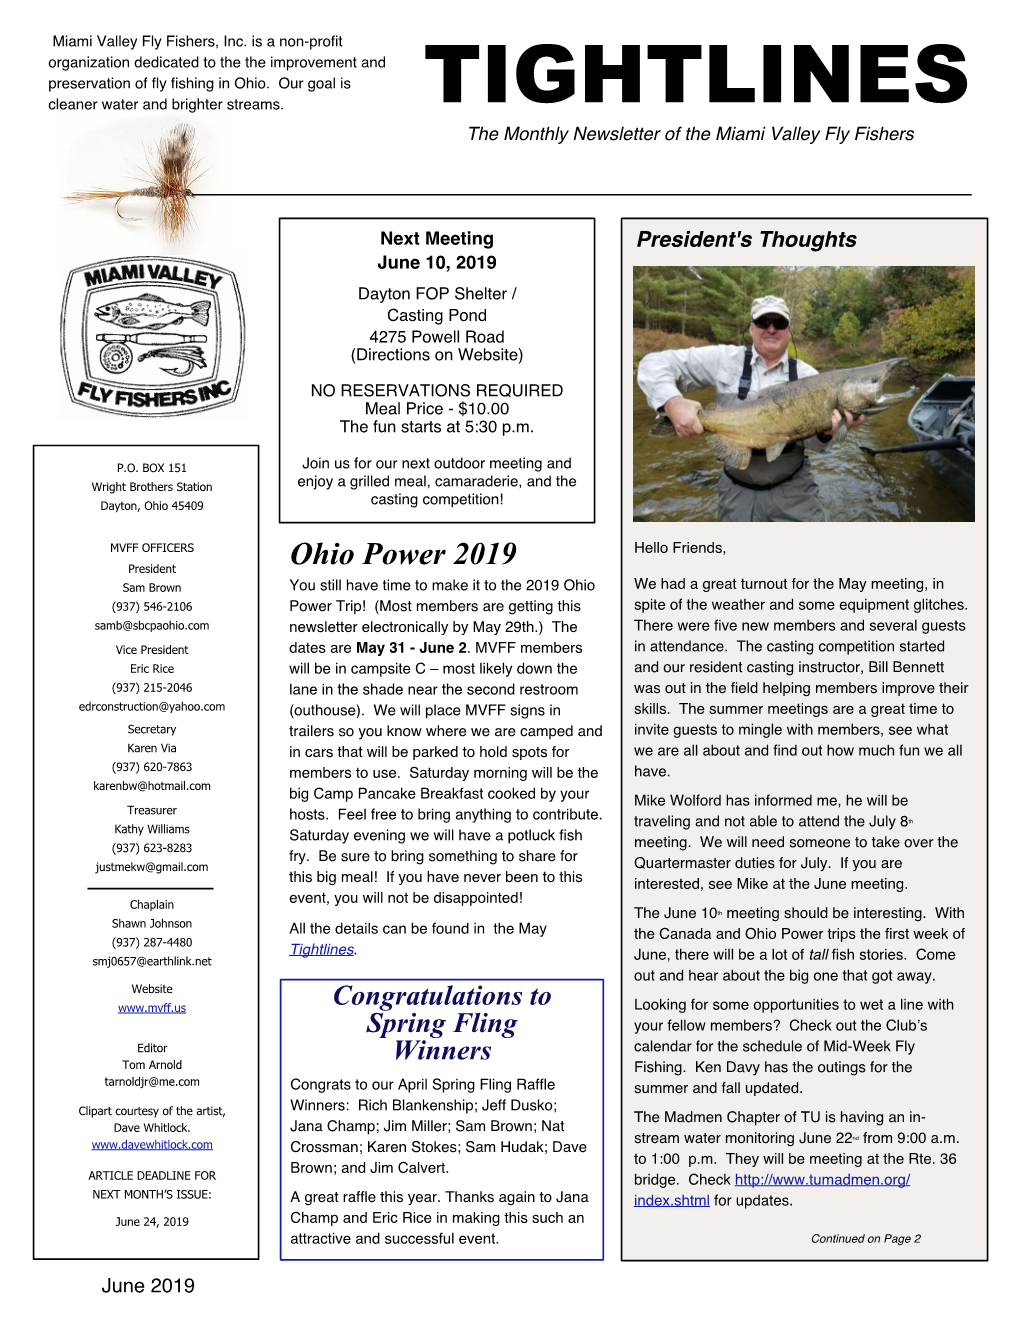 TIGHTLINES the Monthly Newsletter of the Miami Valley Fly Fishers